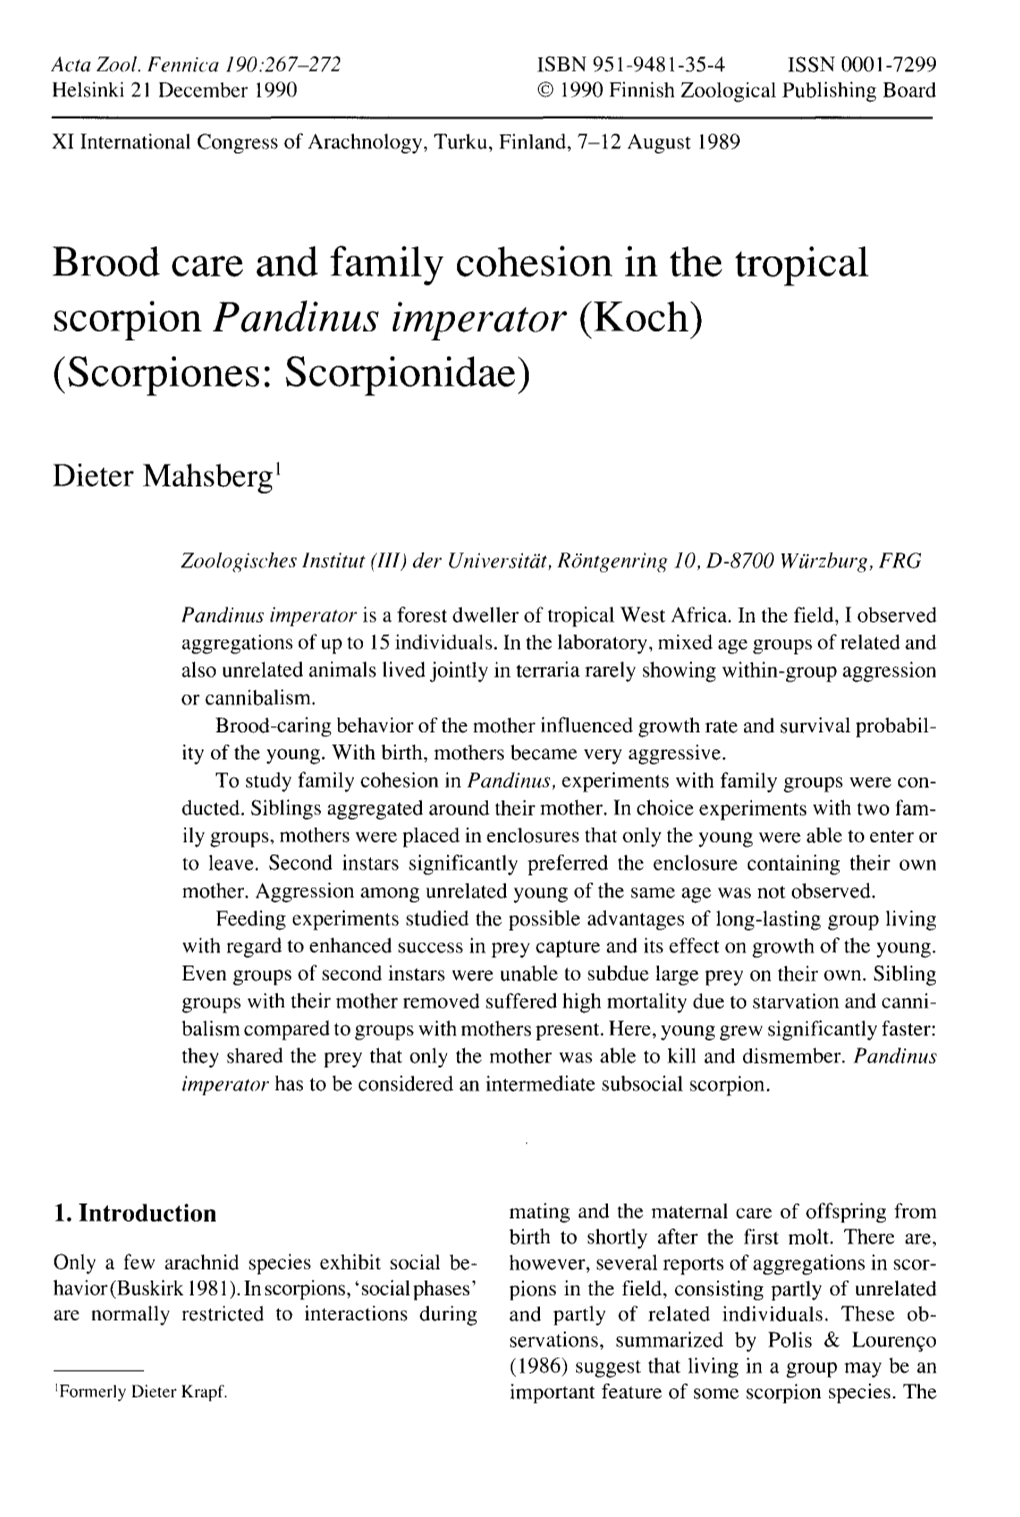 Brood Care and Family Cohesion in the Tropical Scorpion Pandinus Imperator (Koch) (Scorpiones: Scorpionidae)